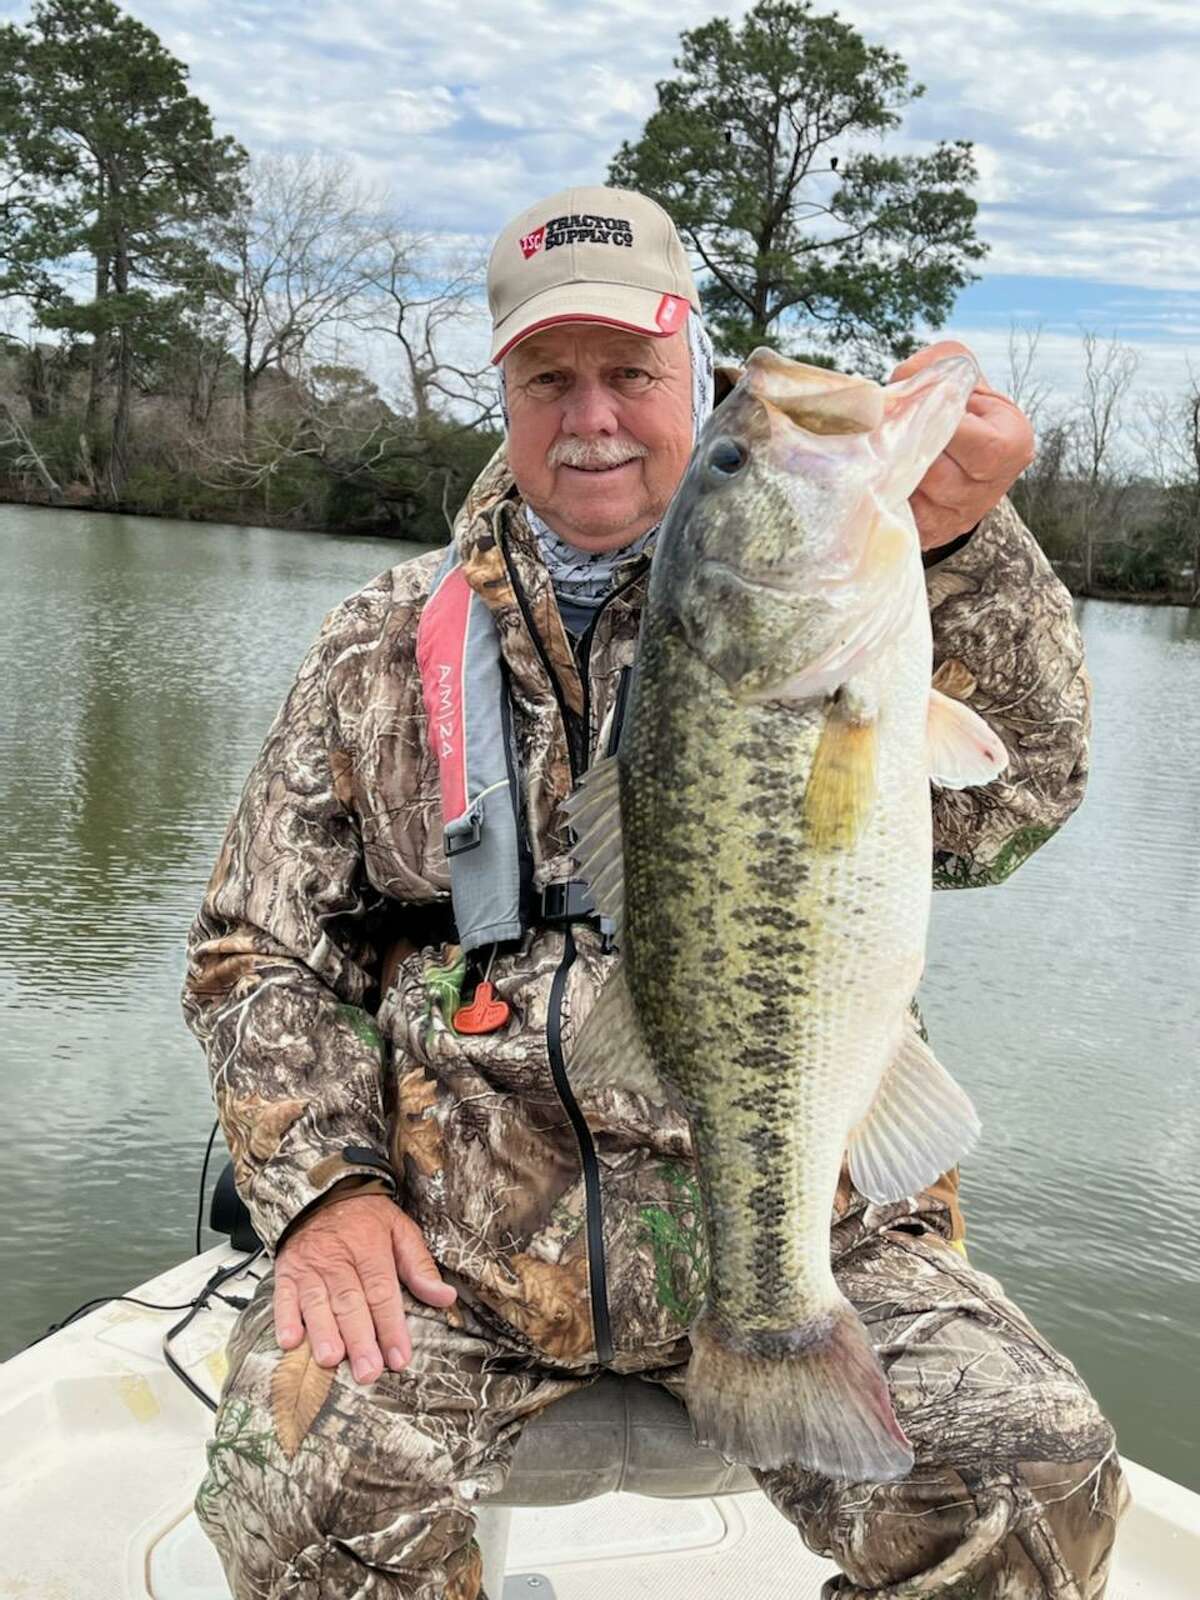 Fishing guide Butch Terpe holds an 8.24 pound black bass he caught recently on a six inch plastic worm.